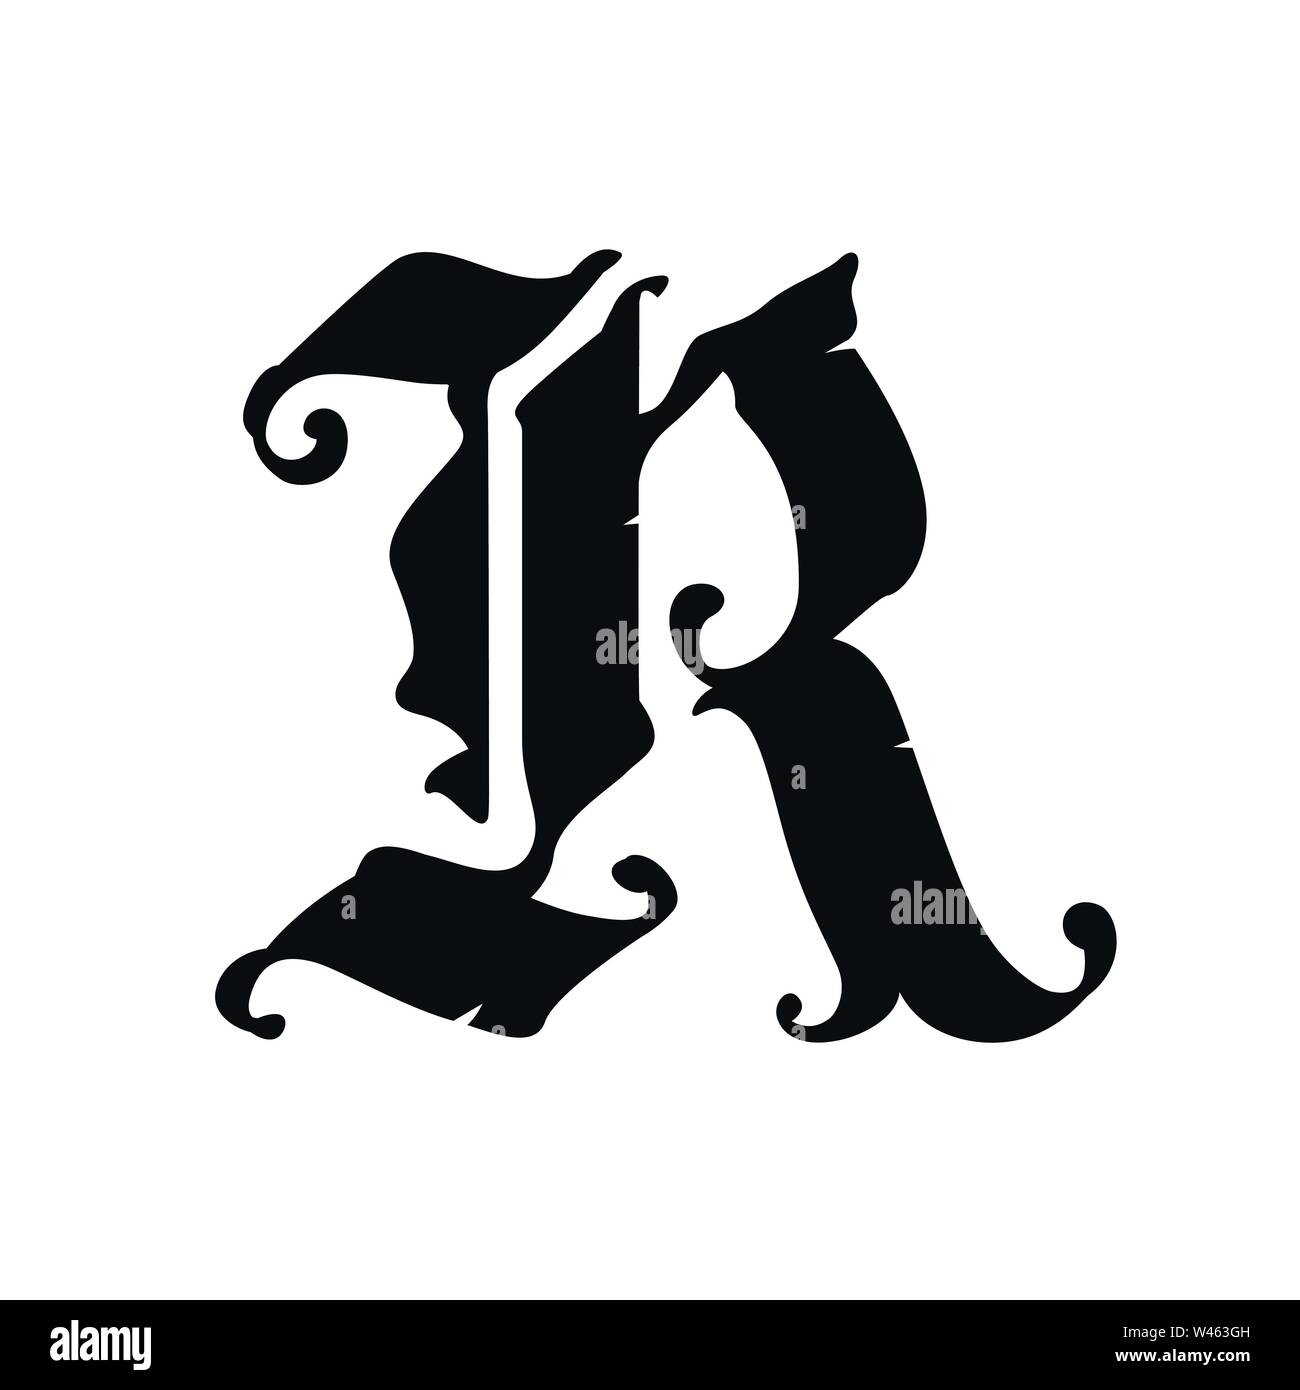 121 R Letter Love Tattoo Images Stock Photos  Vectors  Shutterstock